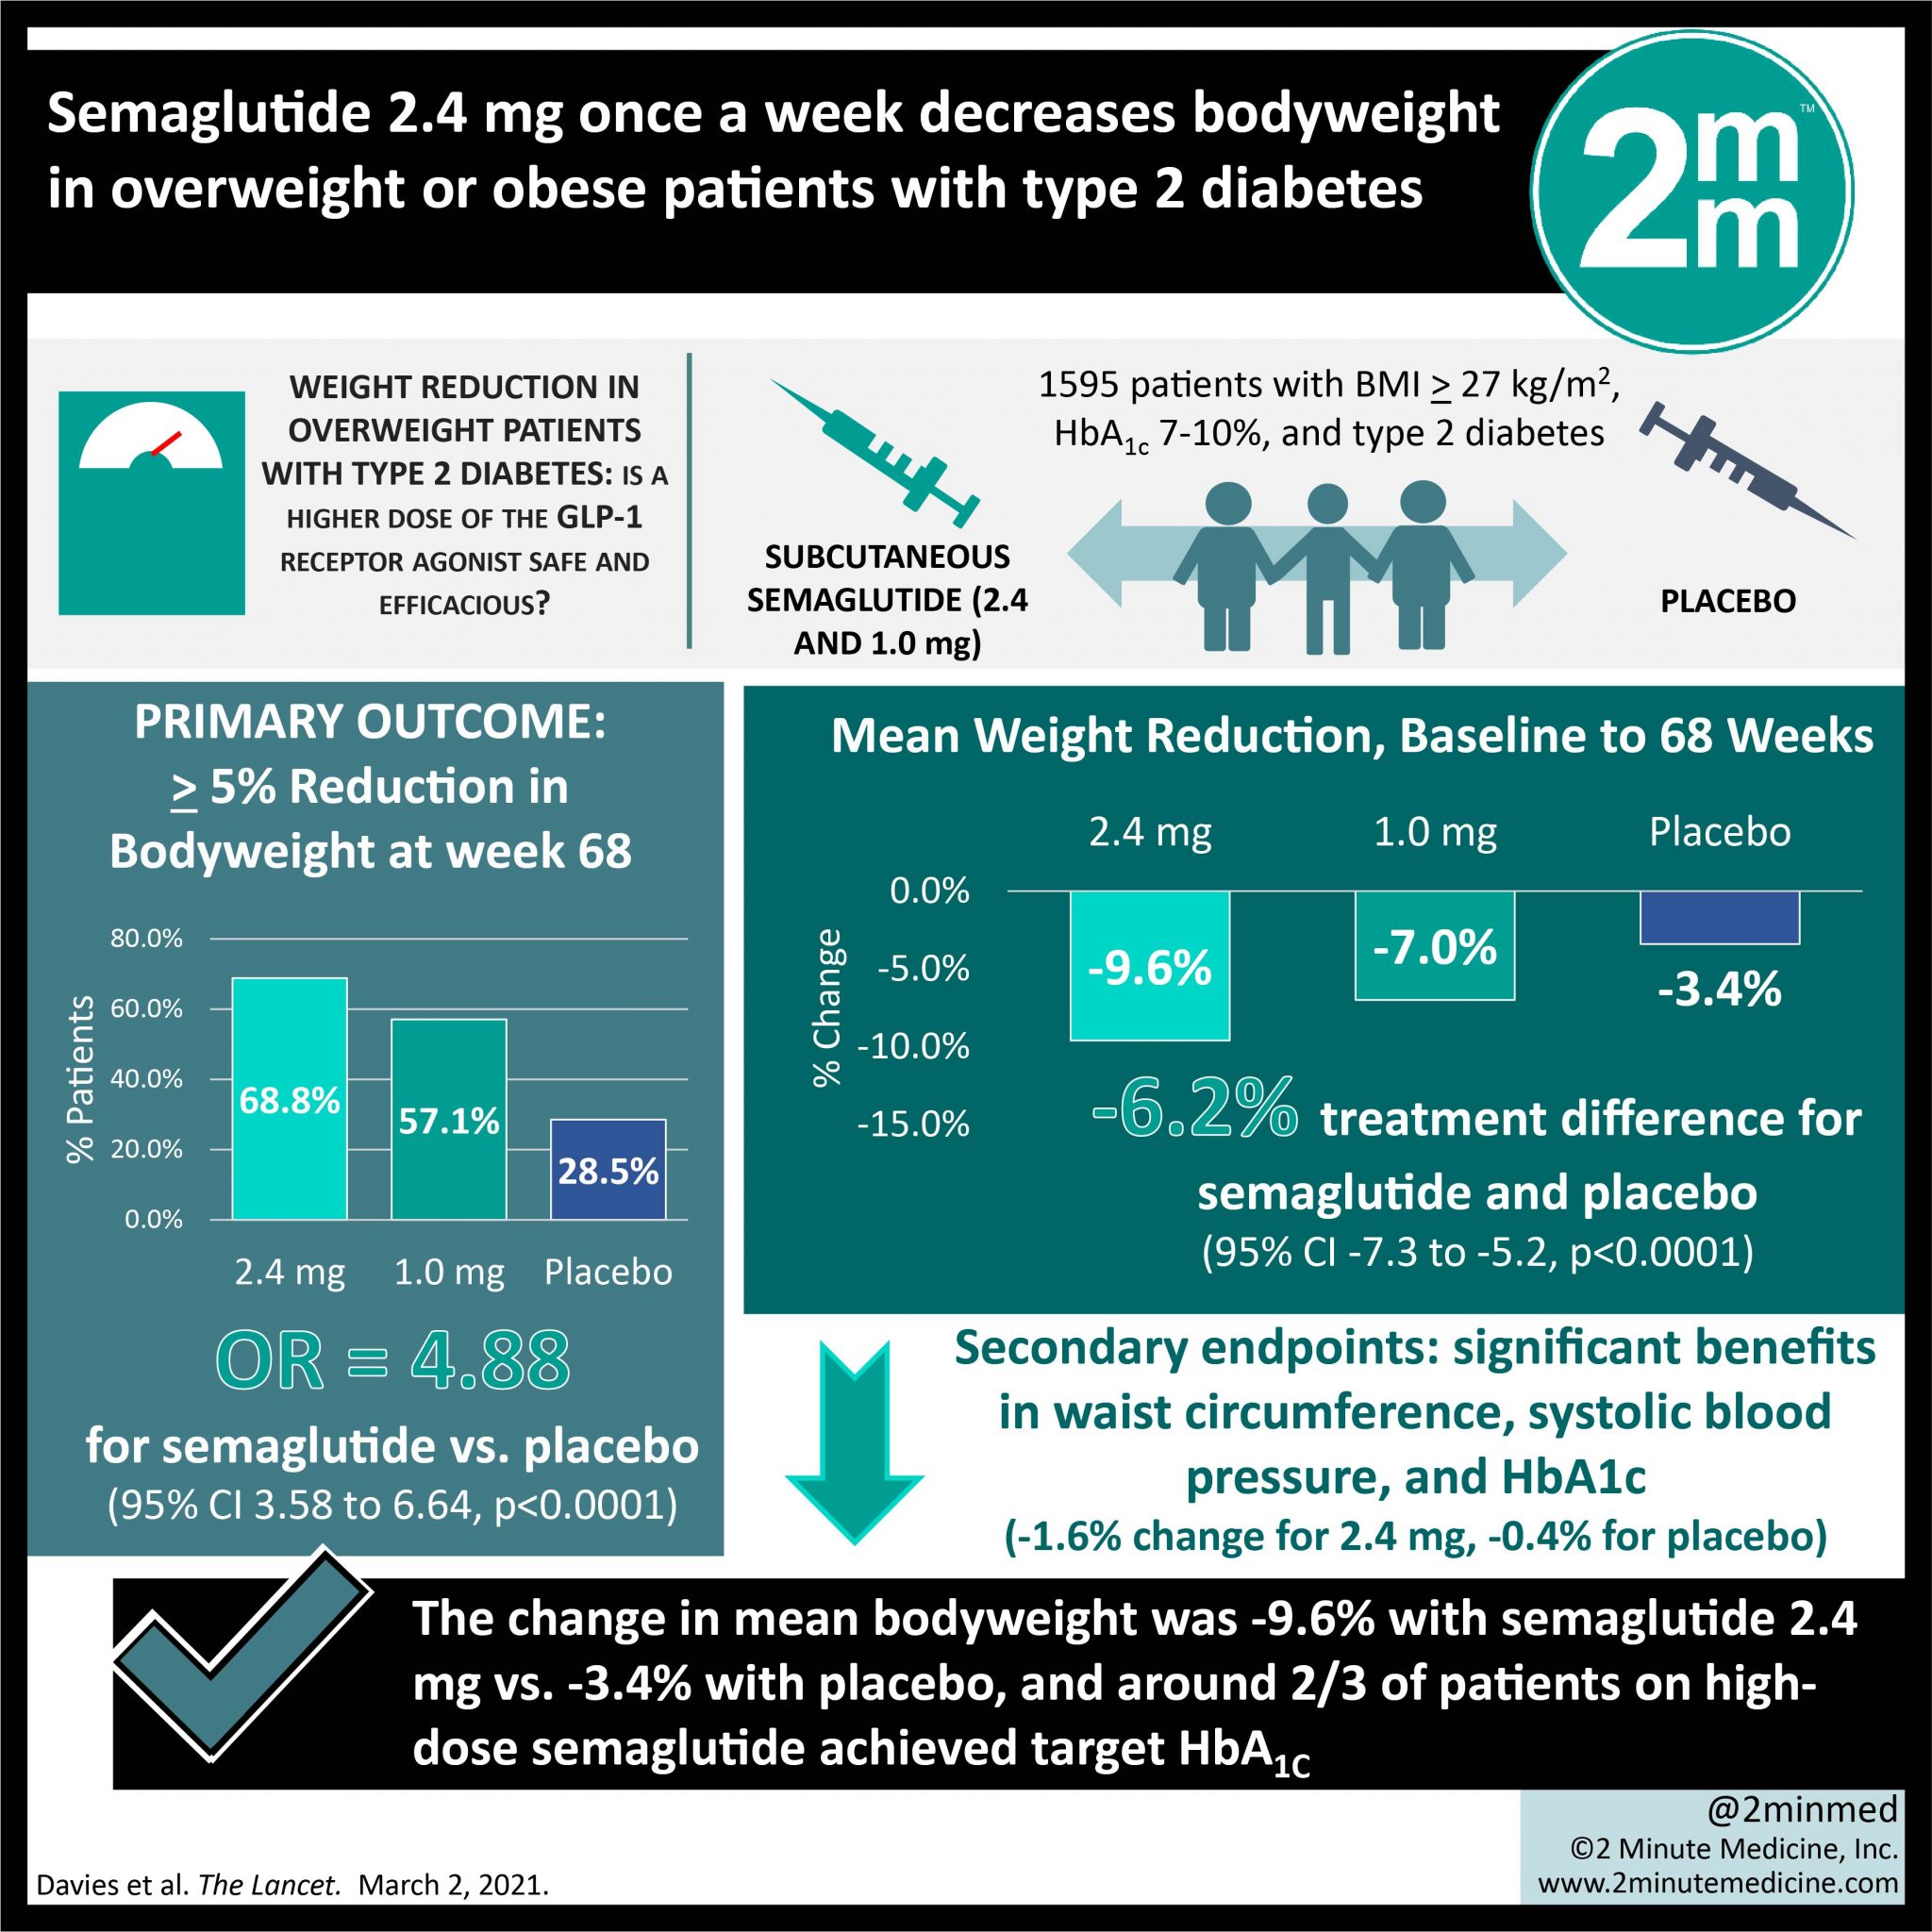 #VisualAbstract: Semaglutide 2.4 mg once a week decreases bodyweight in